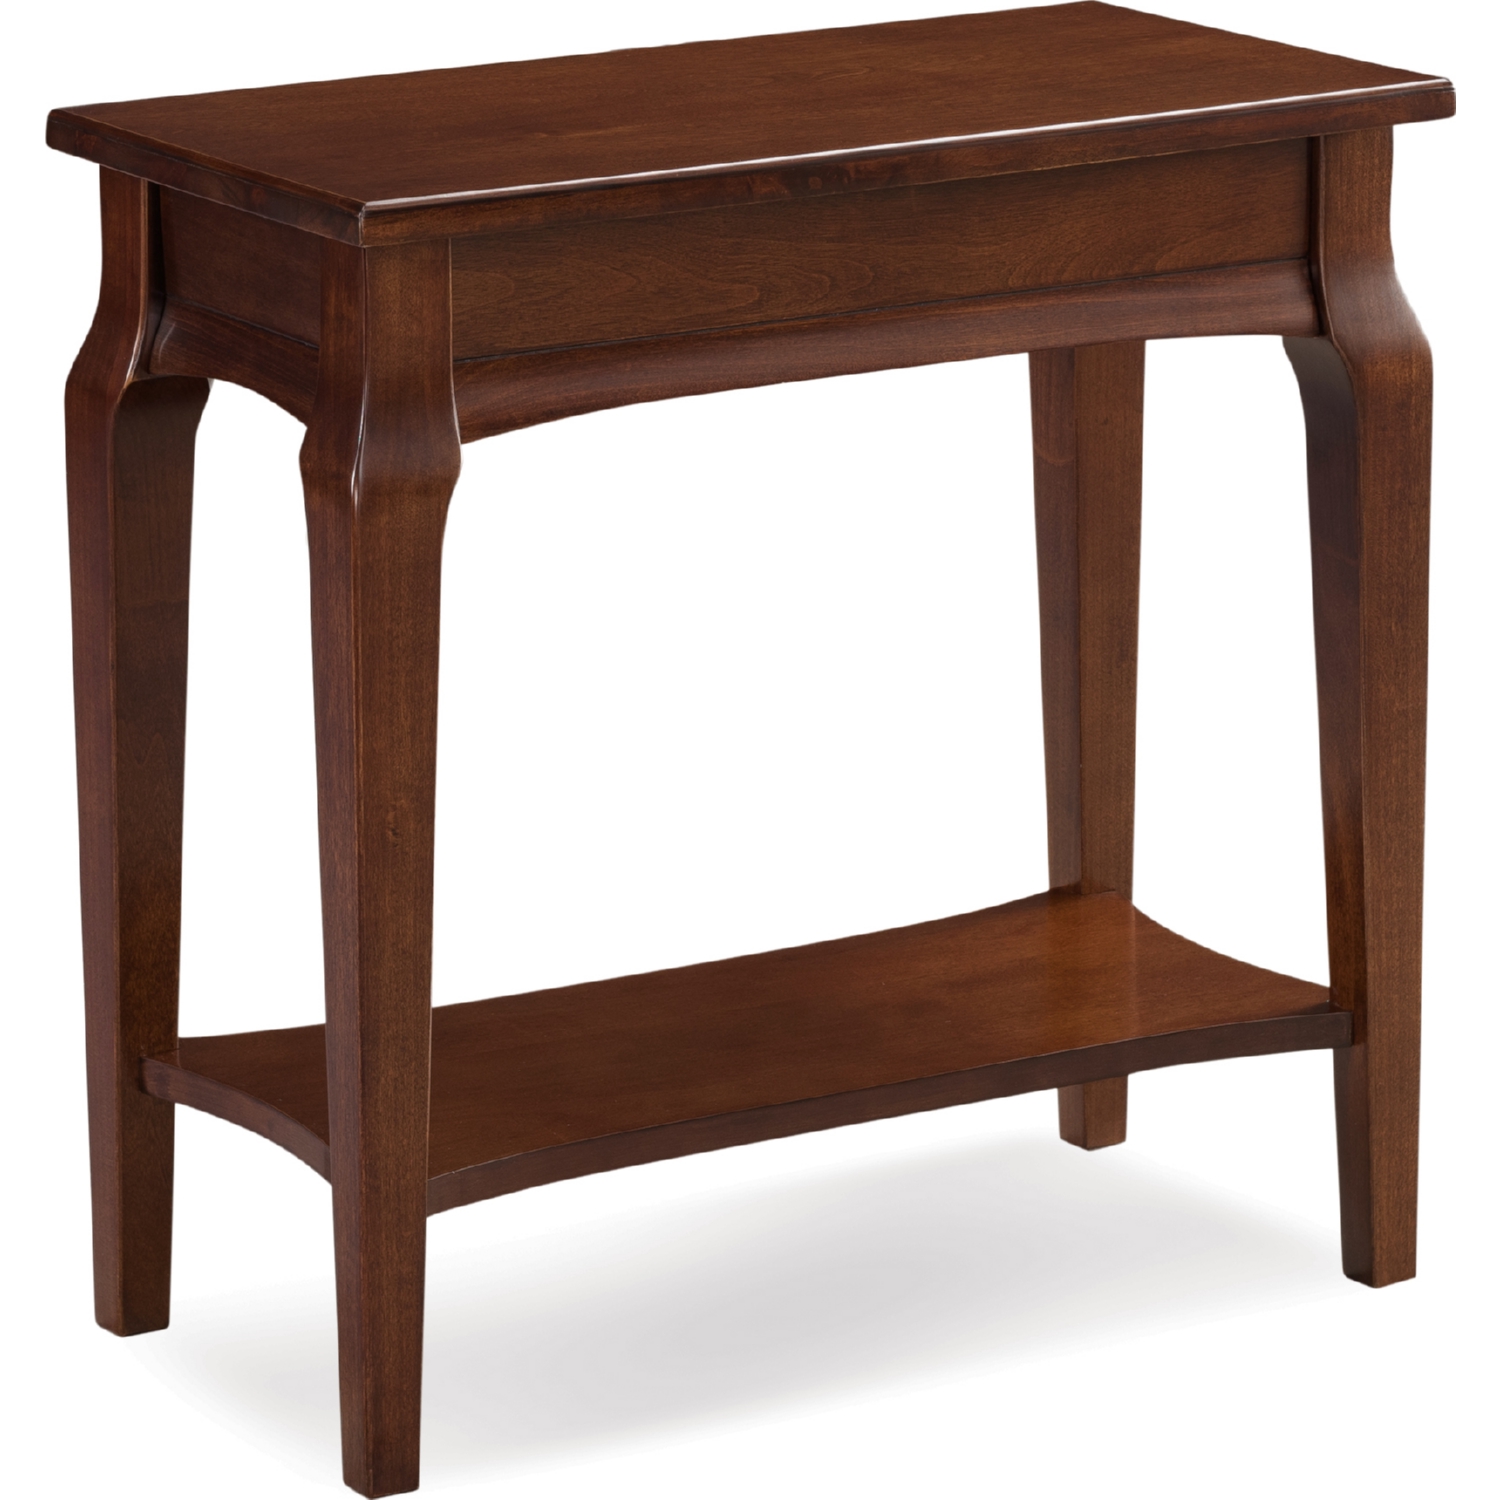 Stratus Narrow Chairside End Table in Heartwood Cherry by Leick Home